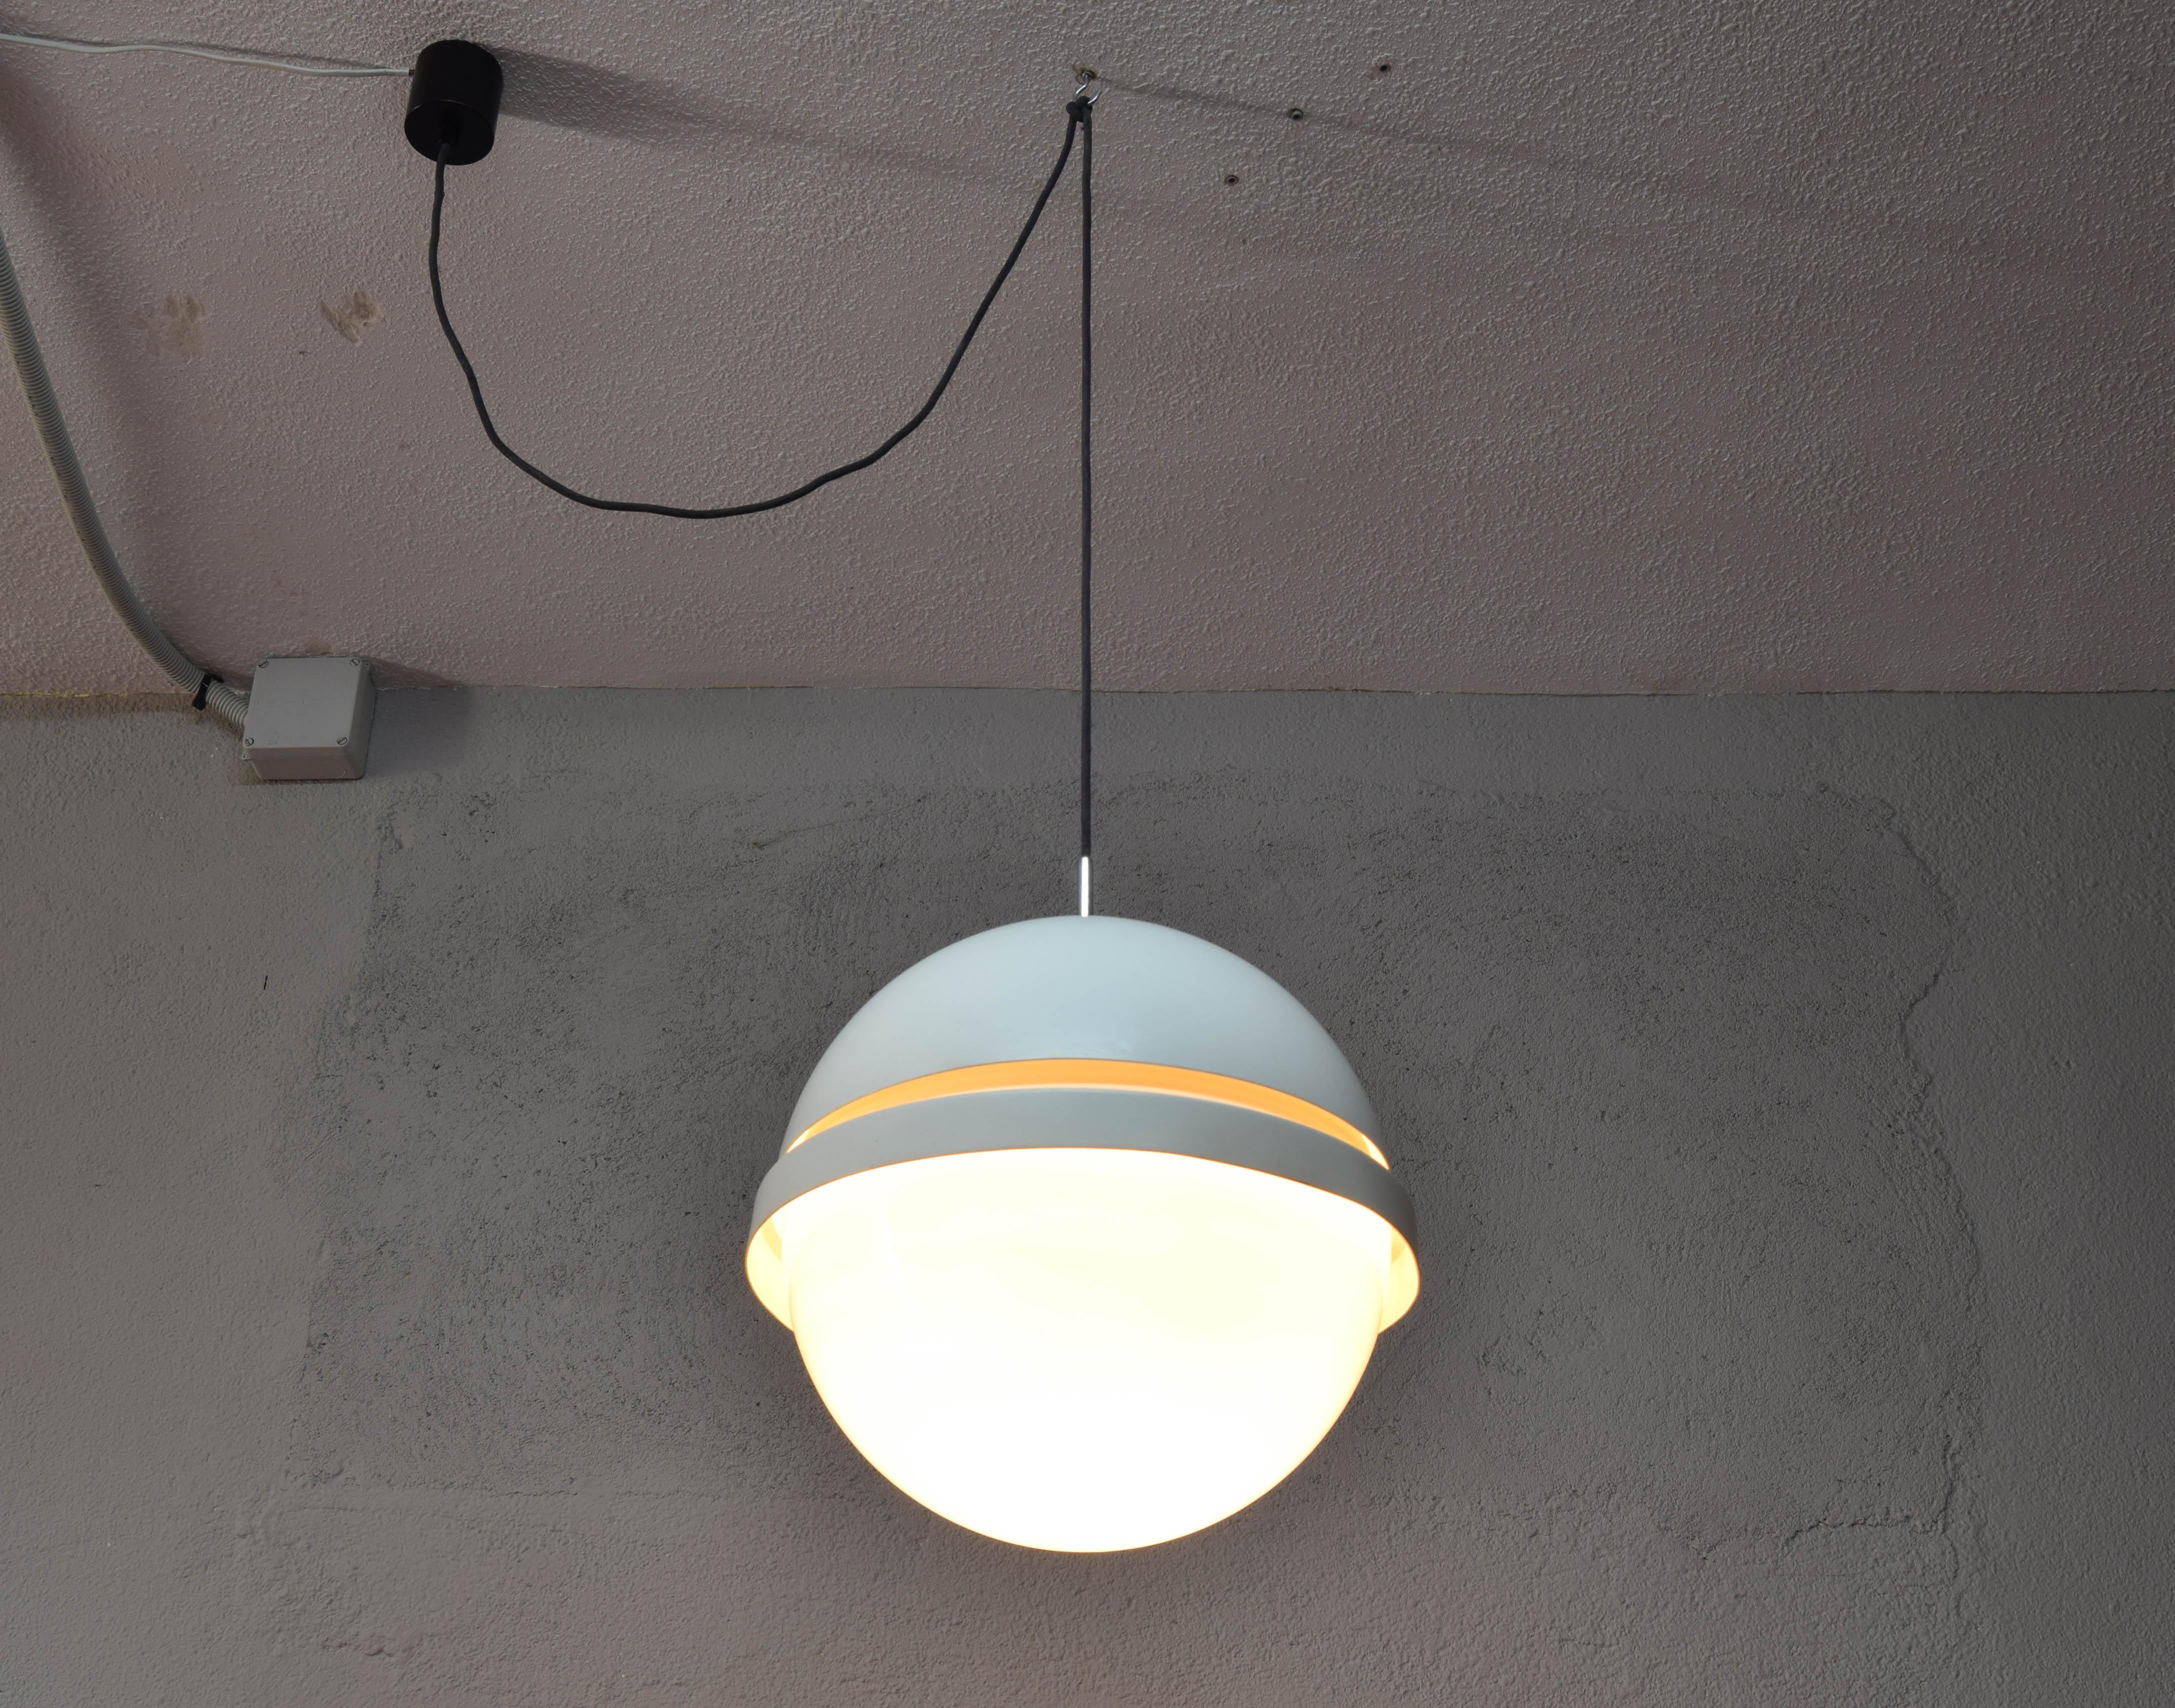 Late 20th Century Mid-Century Modern Moon Ceiling Lamp by Andre Ricard for Metalarte Spain, 70s